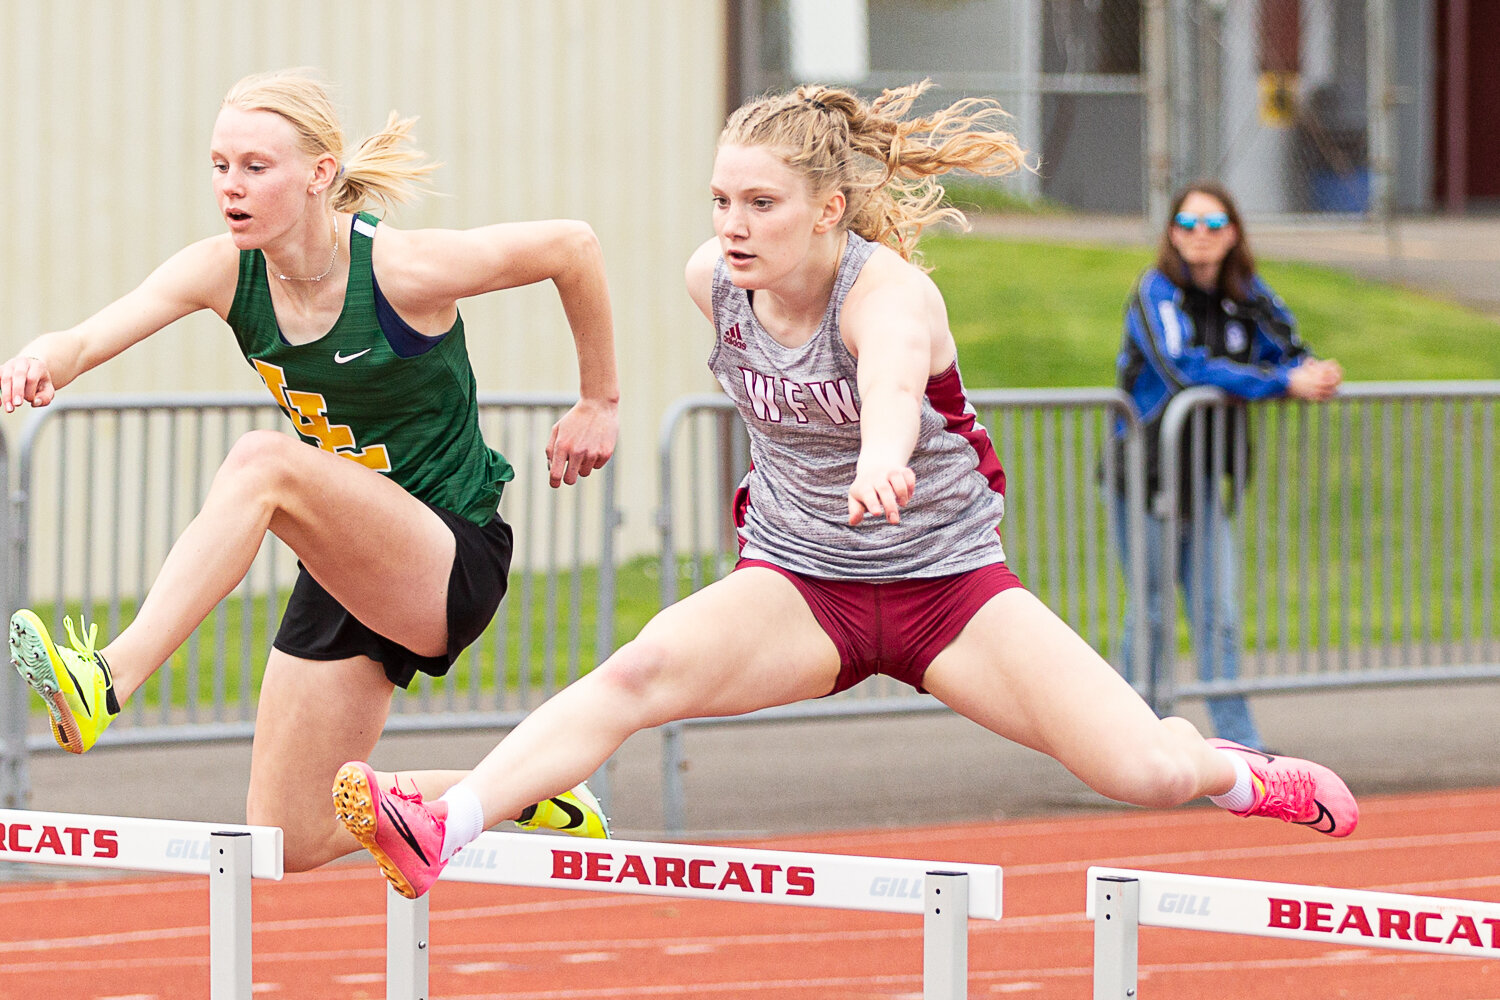 W.F. West's Emily Mallonee leaps over a hurdle in the 300-meter hurdles at the Chehalis Activators Classic April 22 at W.F. West.